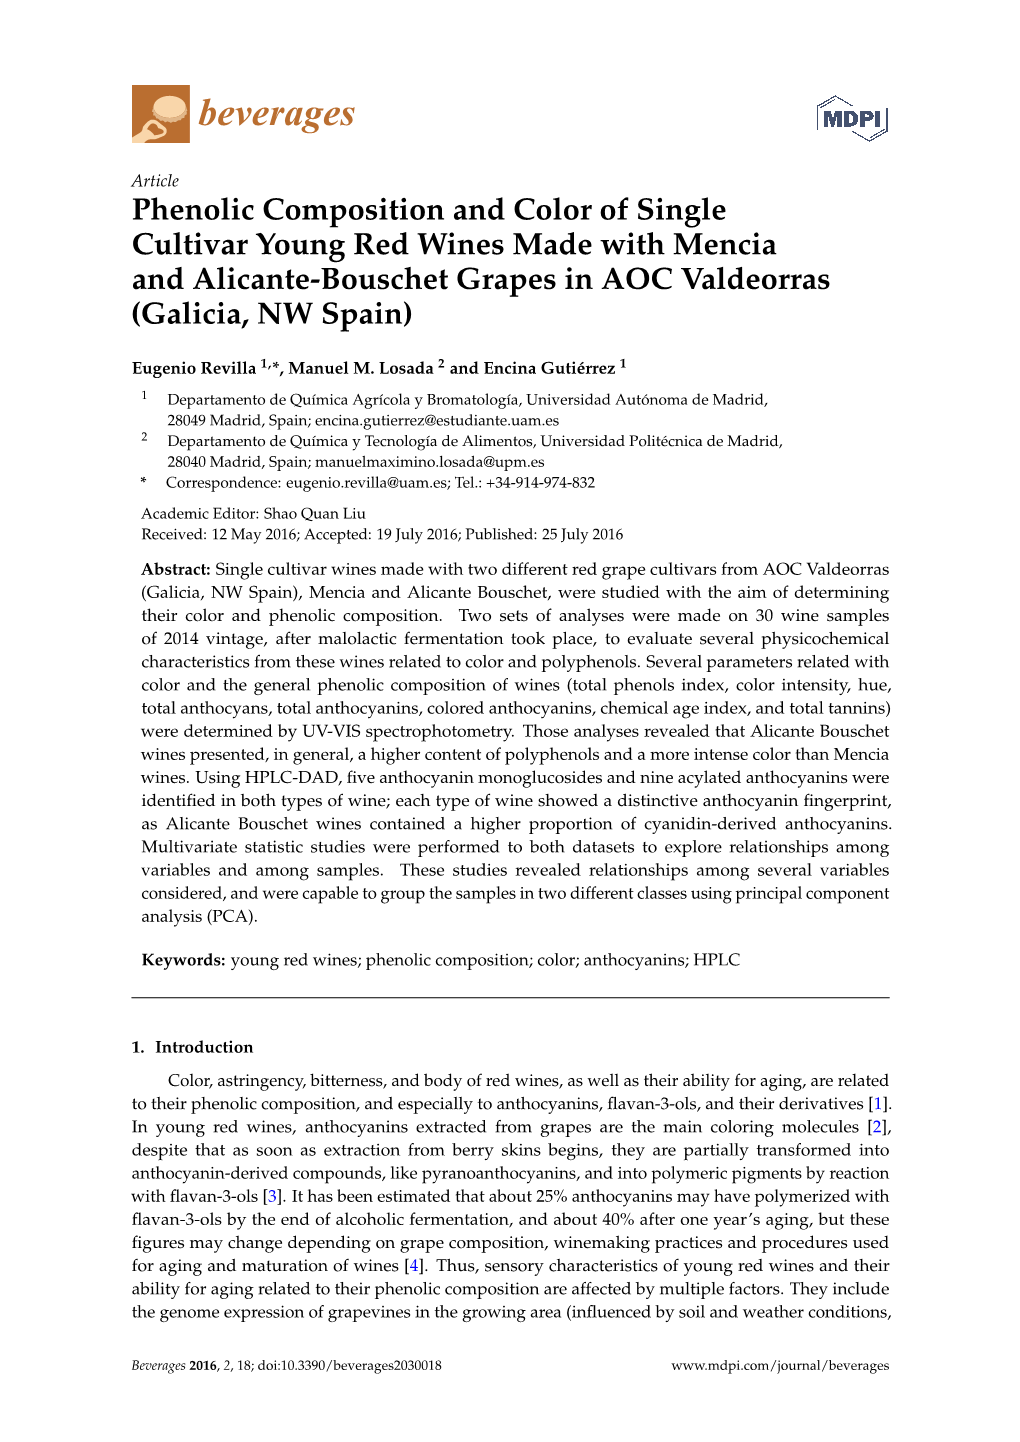 Phenolic Composition and Color of Single Cultivar Young Red Wines Made with Mencia and Alicante-Bouschet Grapes in AOC Valdeorras (Galicia, NW Spain)